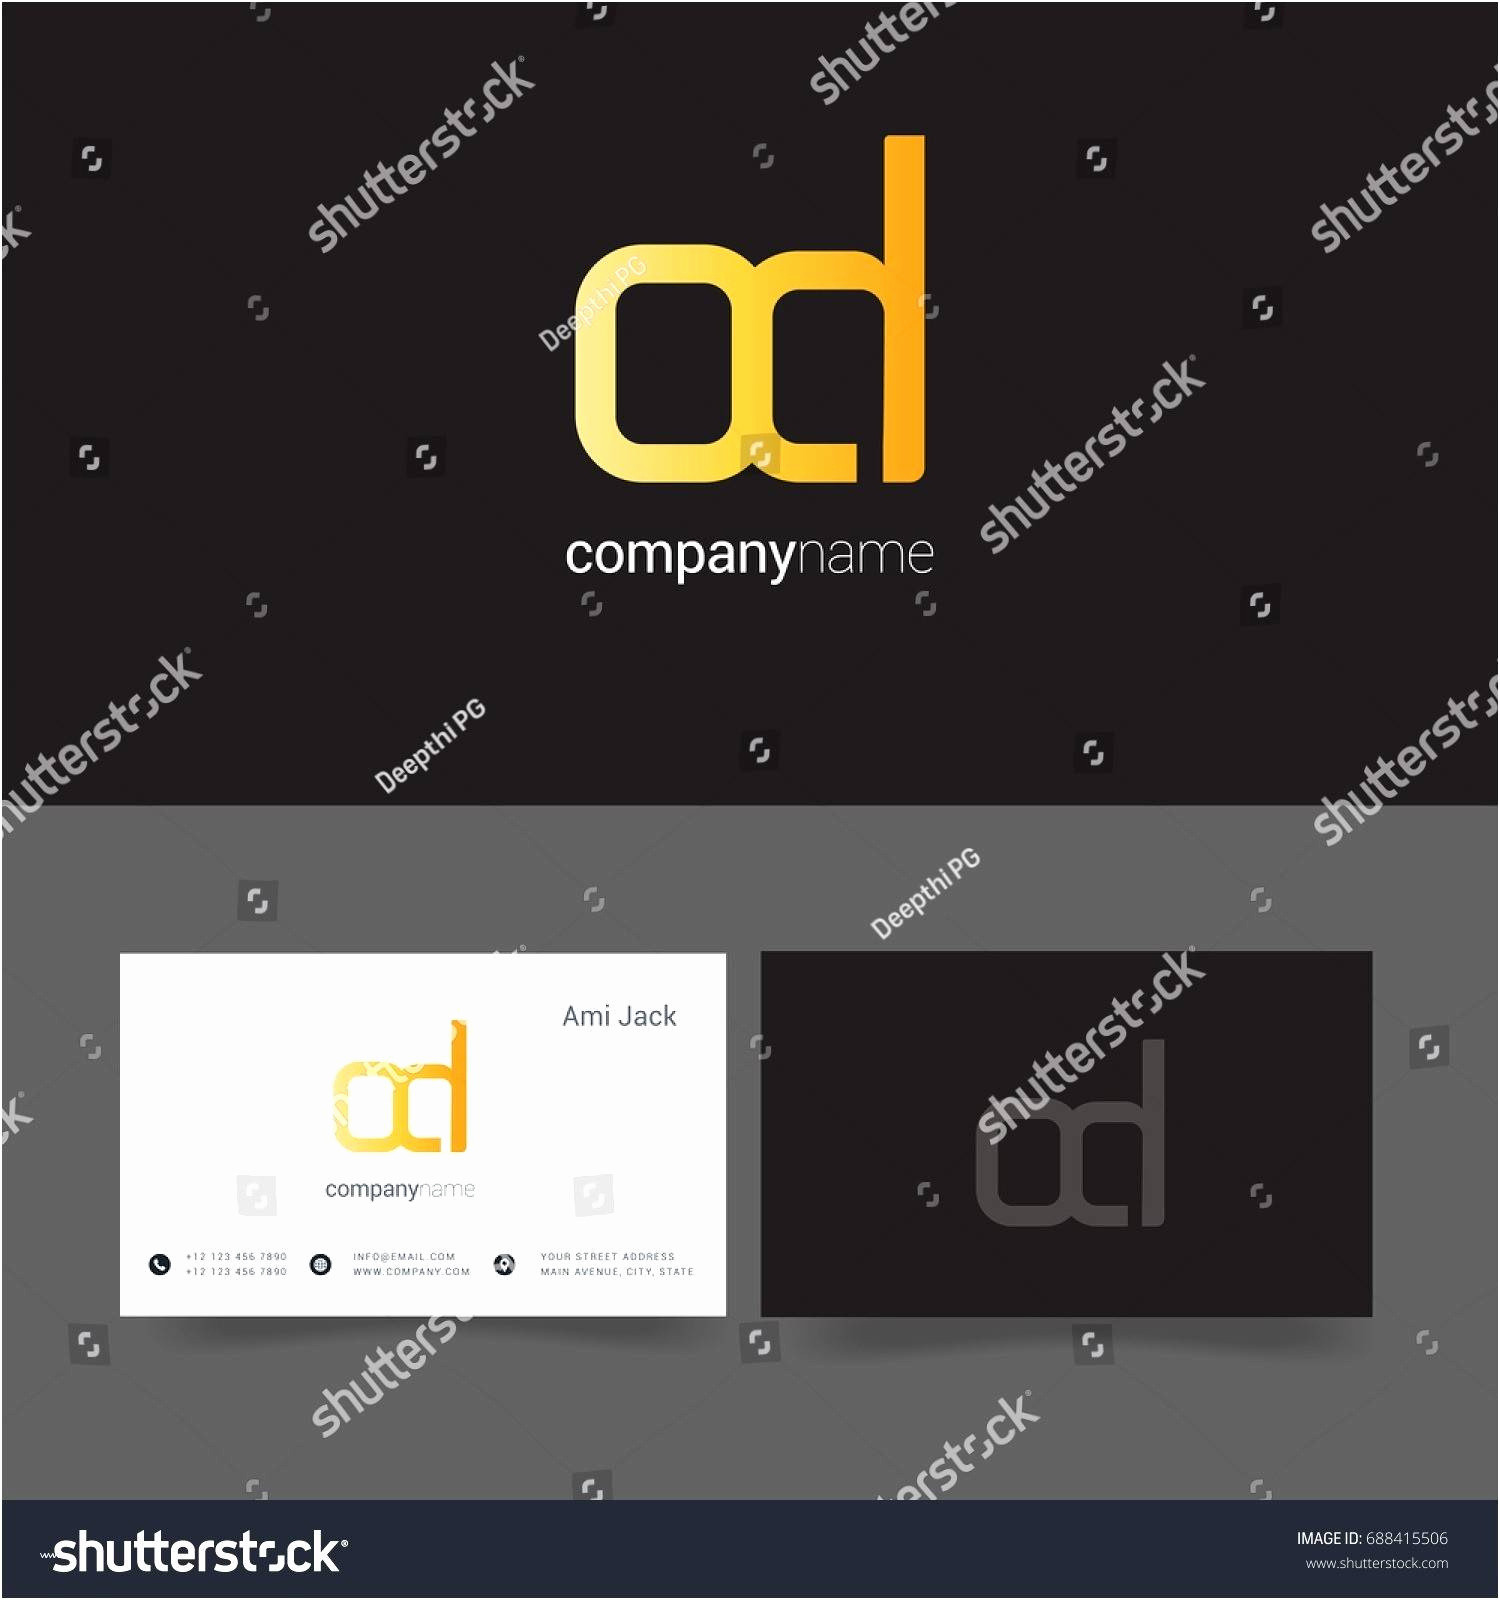 Business Card Template Word Archives Dalriadaproject Of Free Music Business Card Templates